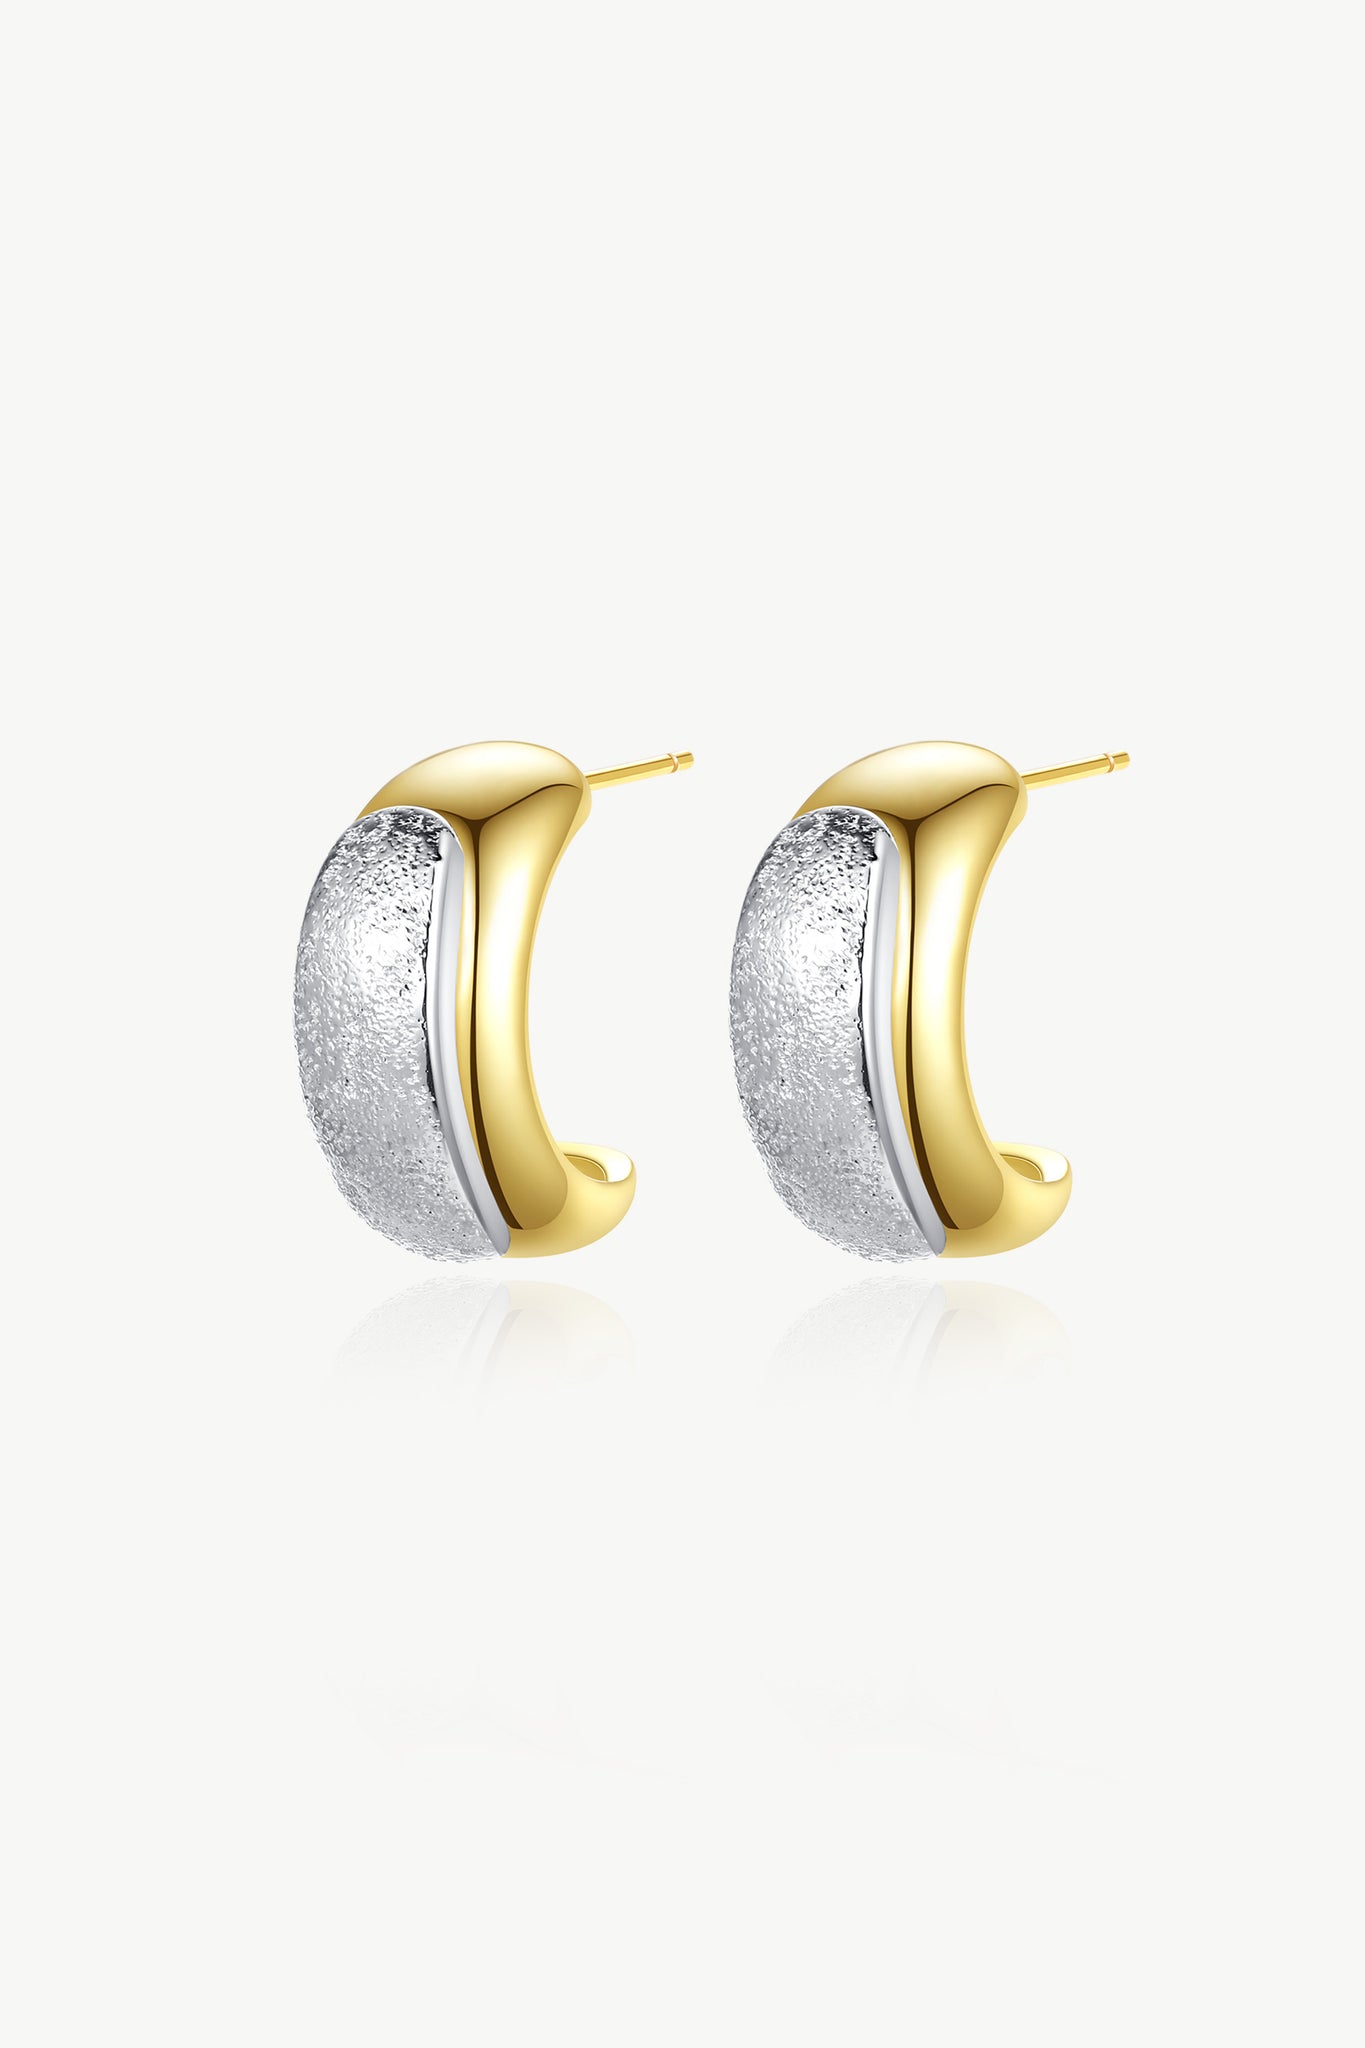 Classicharms Frosted and Matted Texture Two Tone Hoop Earrings - shopidPearl